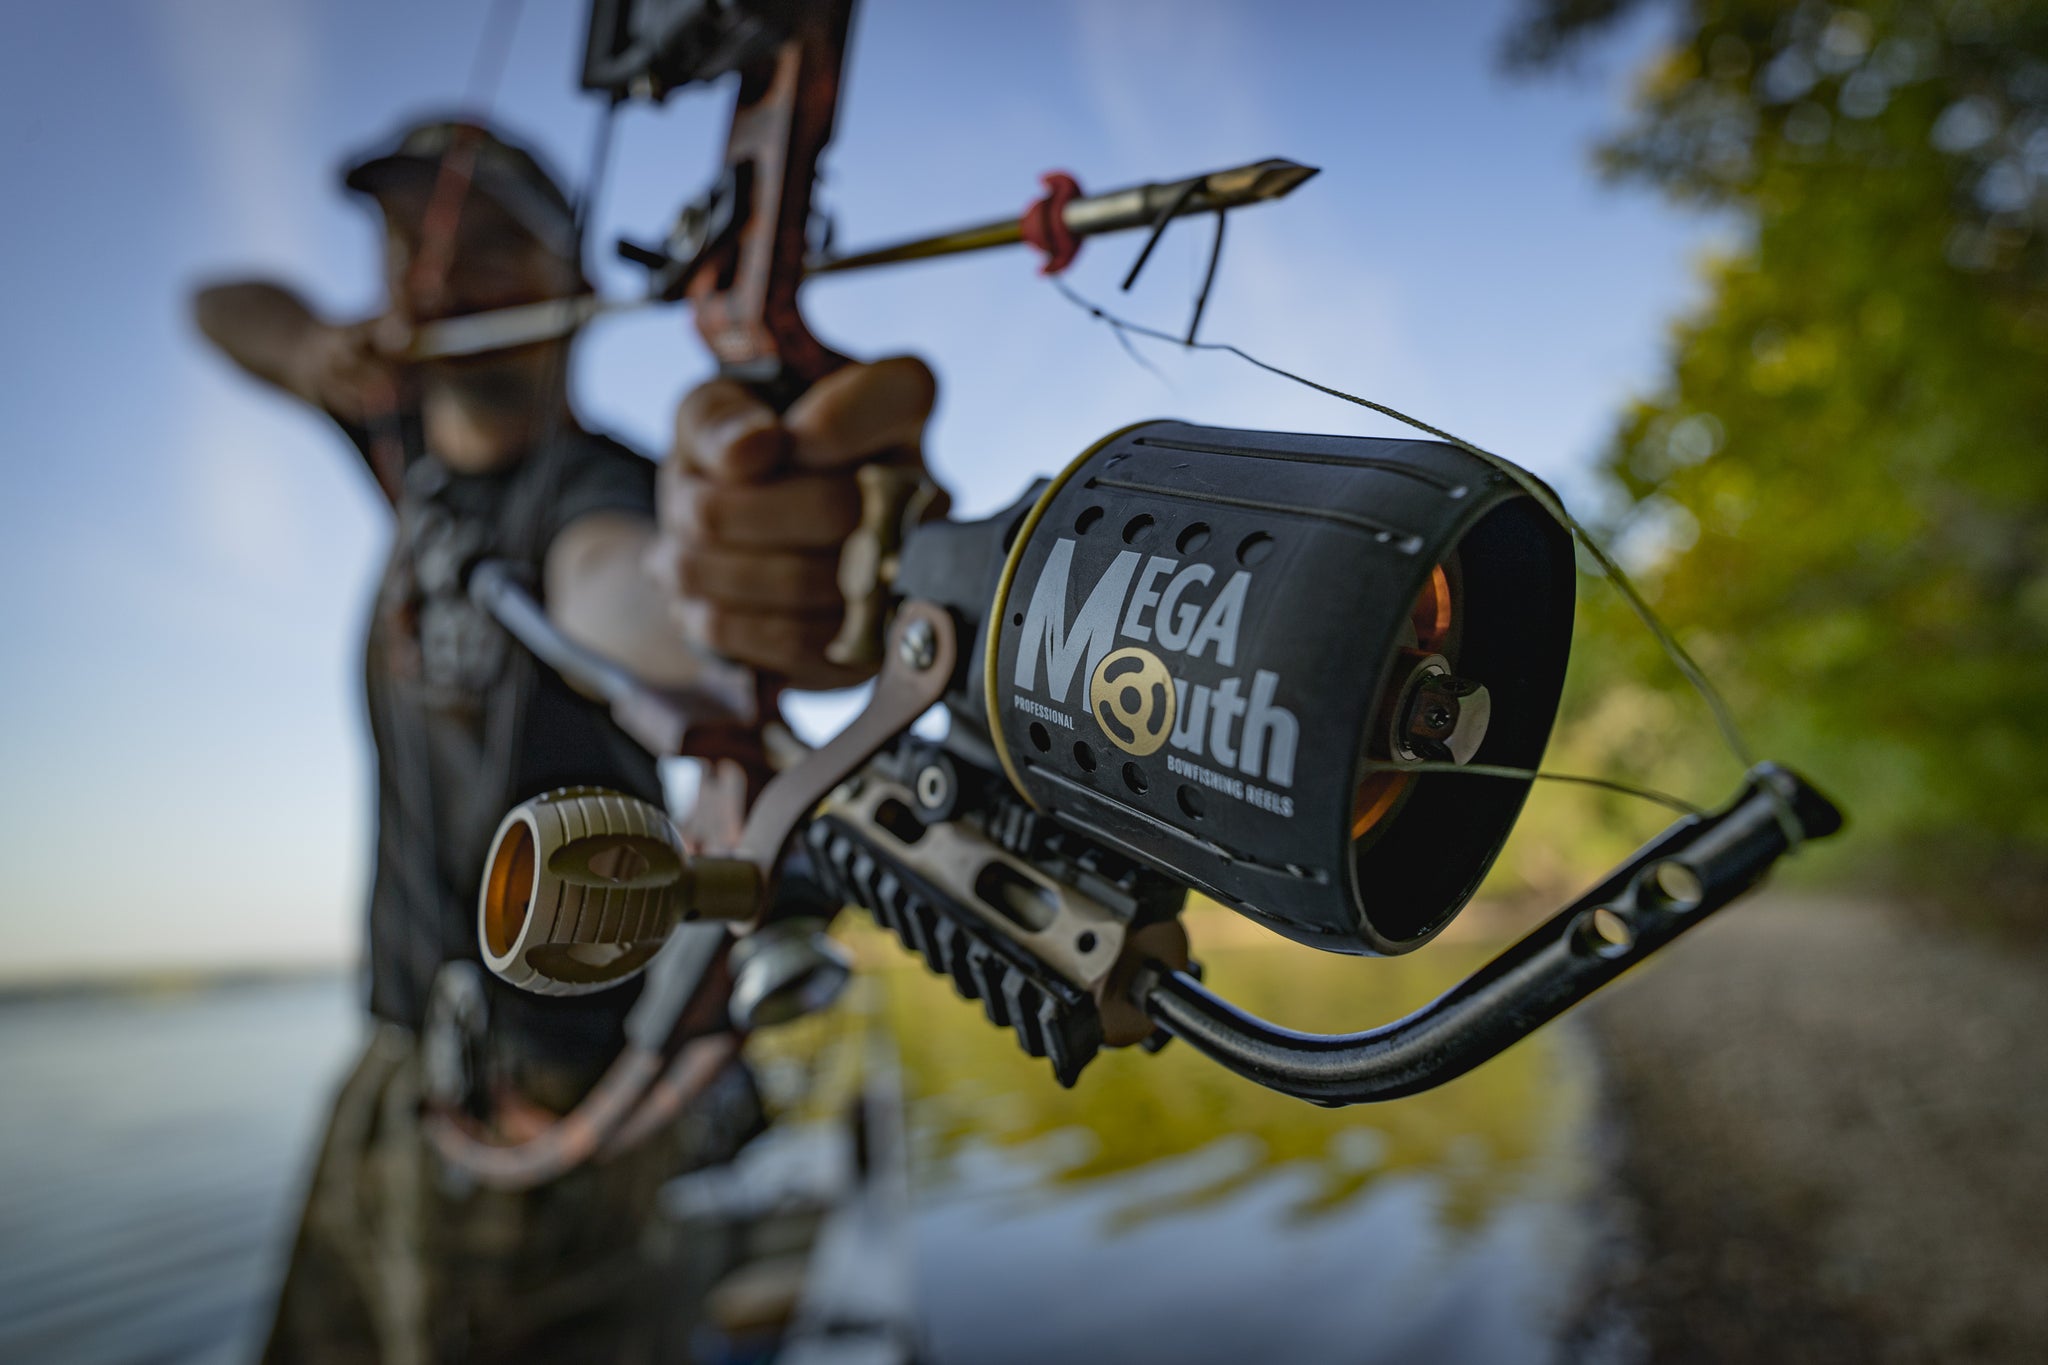 MegaMouth Bowfishing - We have had many common questions about the new MegaMouth  bowfishing reel. We have compiled a list below to address these questions!  ⬇️⬇️⬇️ Q: When will the MegaMouth be